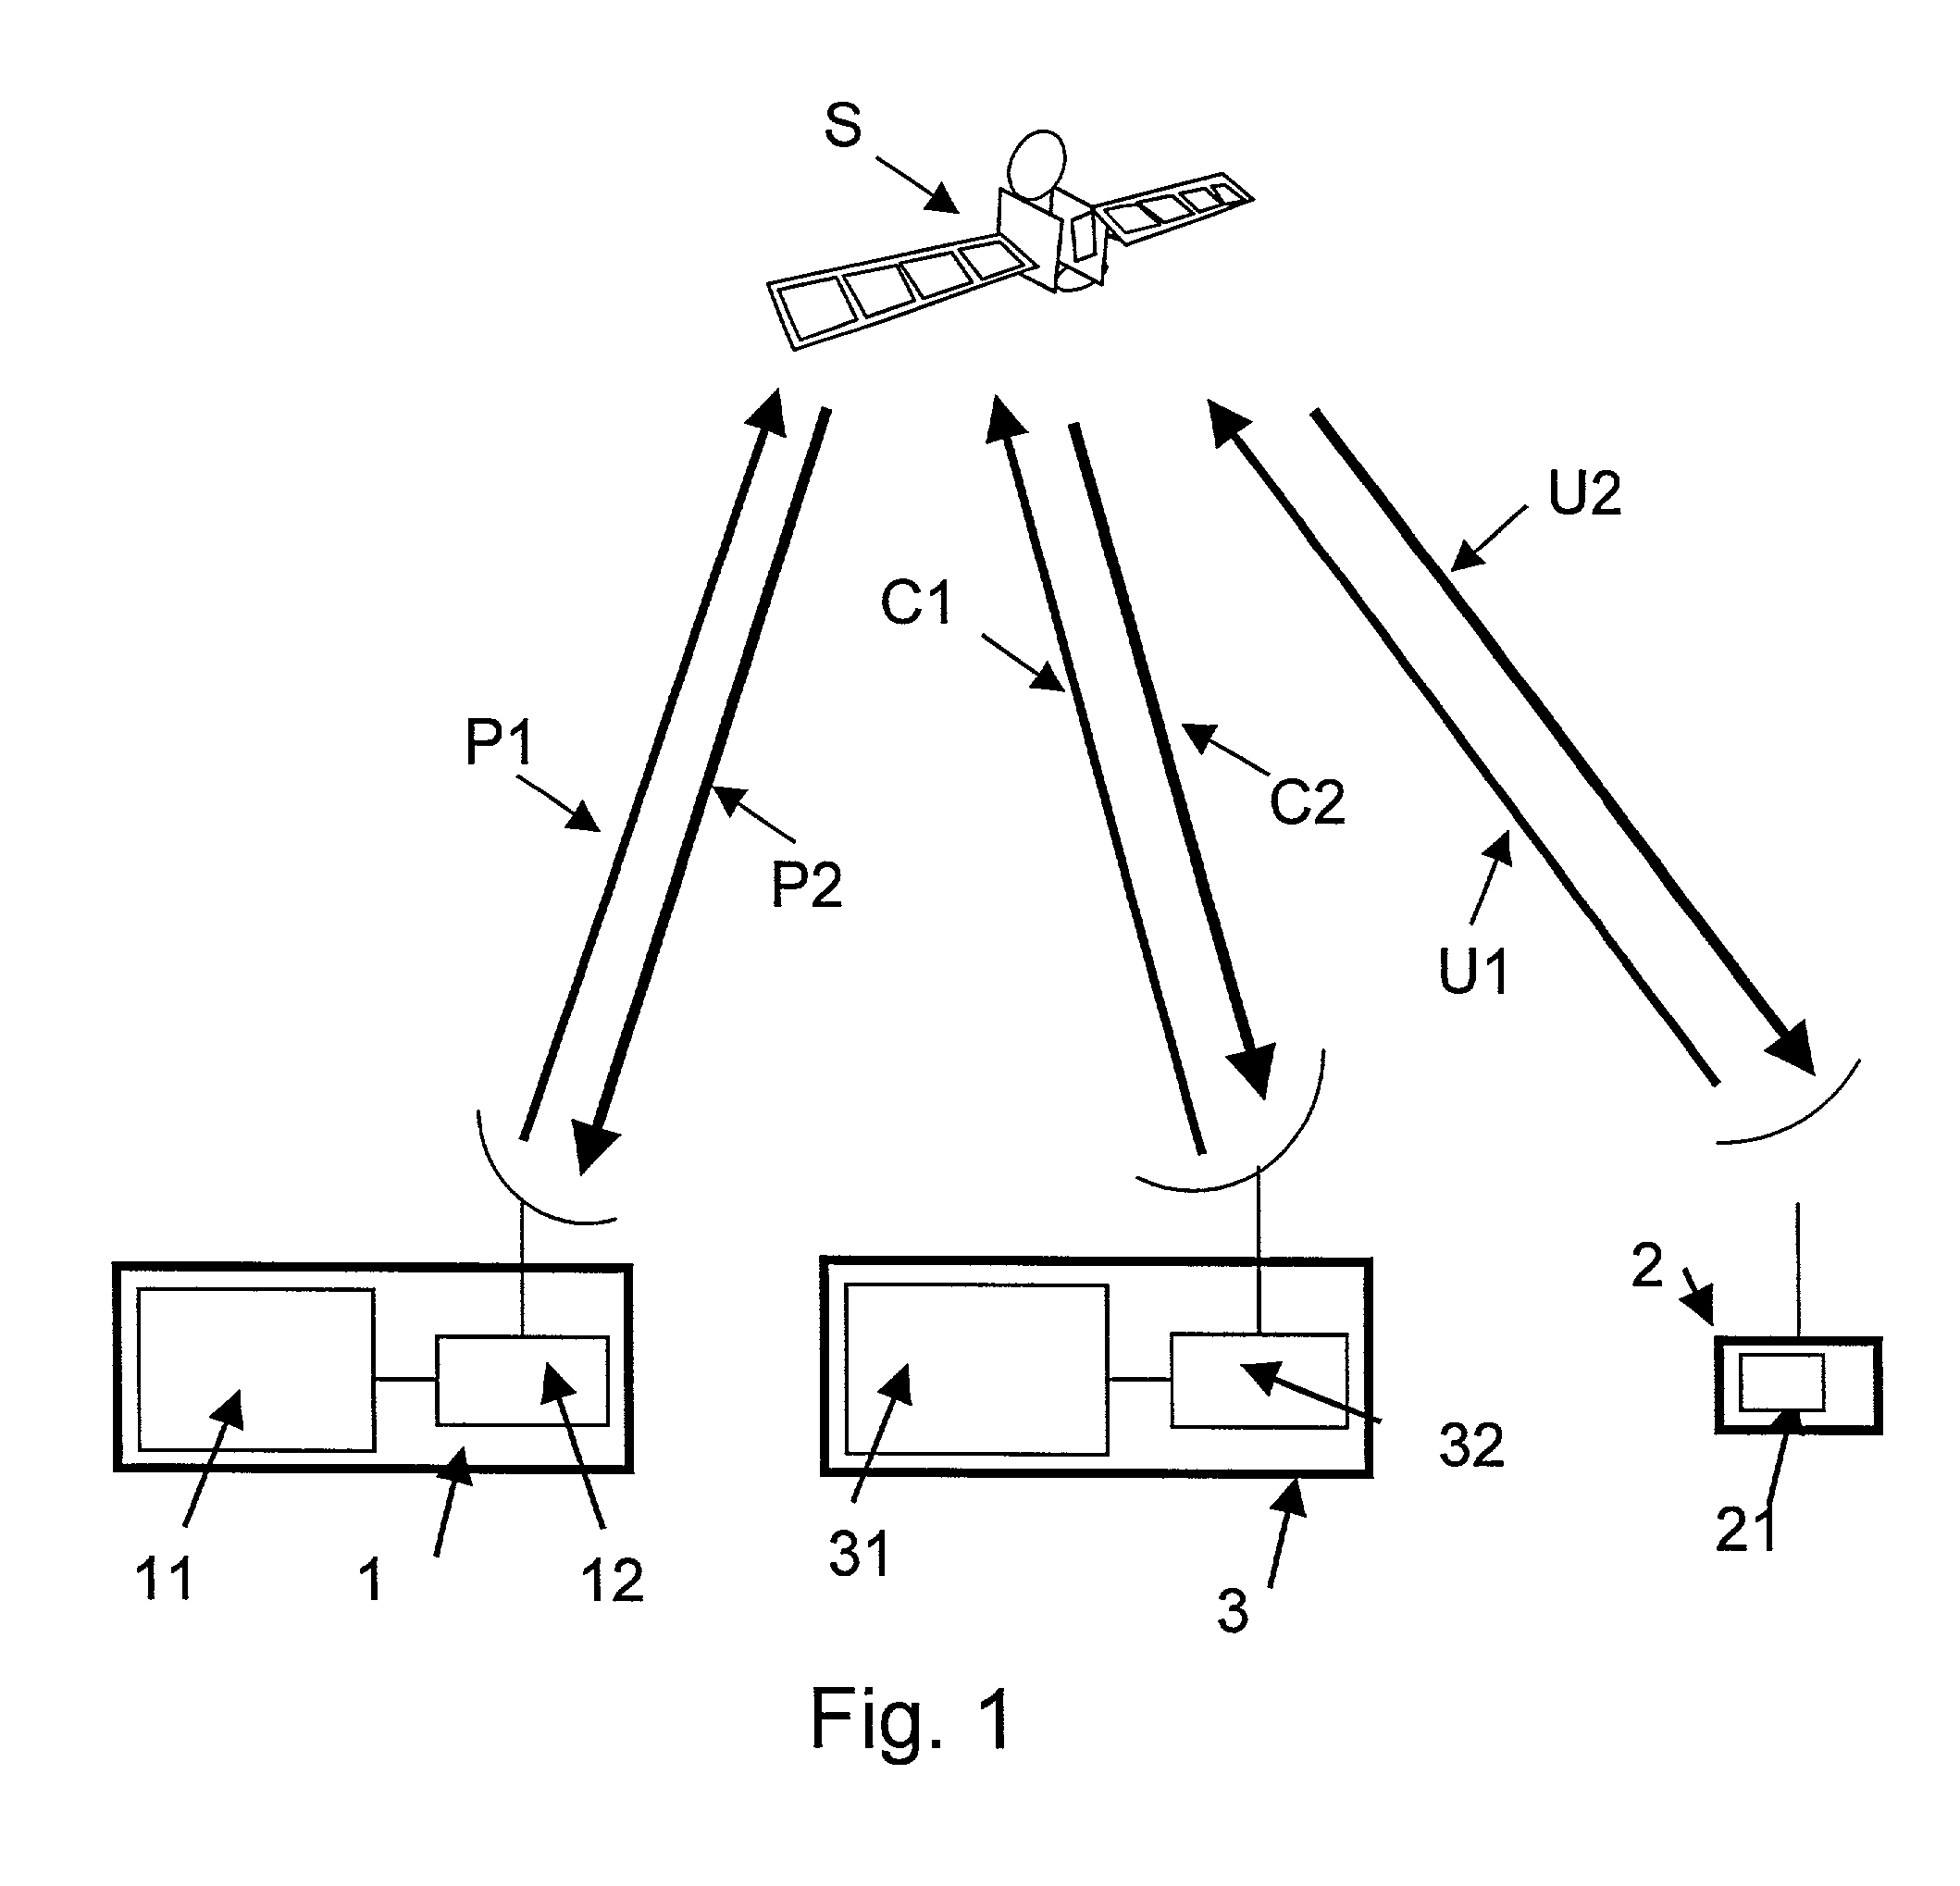 System and method of common synchronisation for bursts transmitted over an uplink connection in an integrated multispot satellite communication system in a multimedia broadcasting network